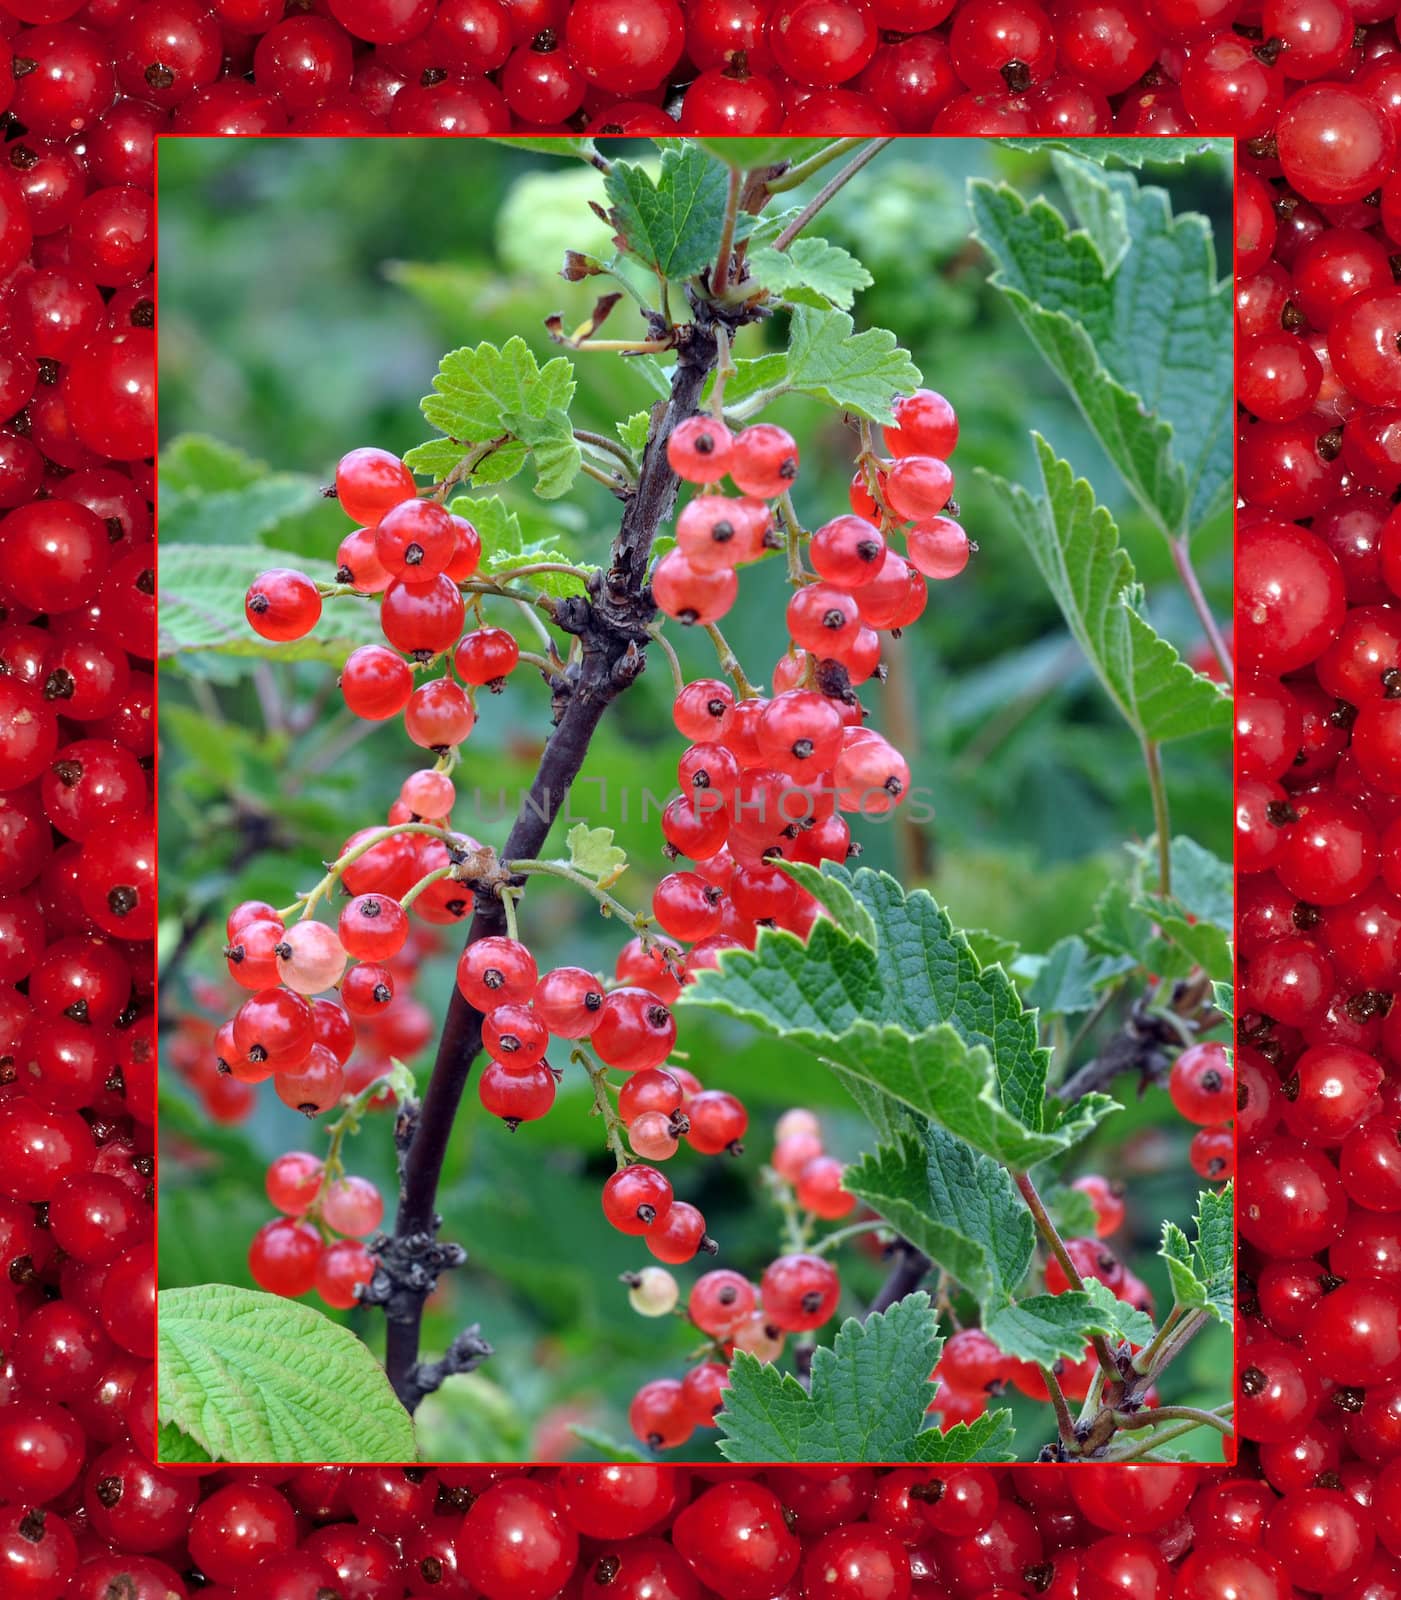 Bush of a red currant with a frame of berries by alexcoolok